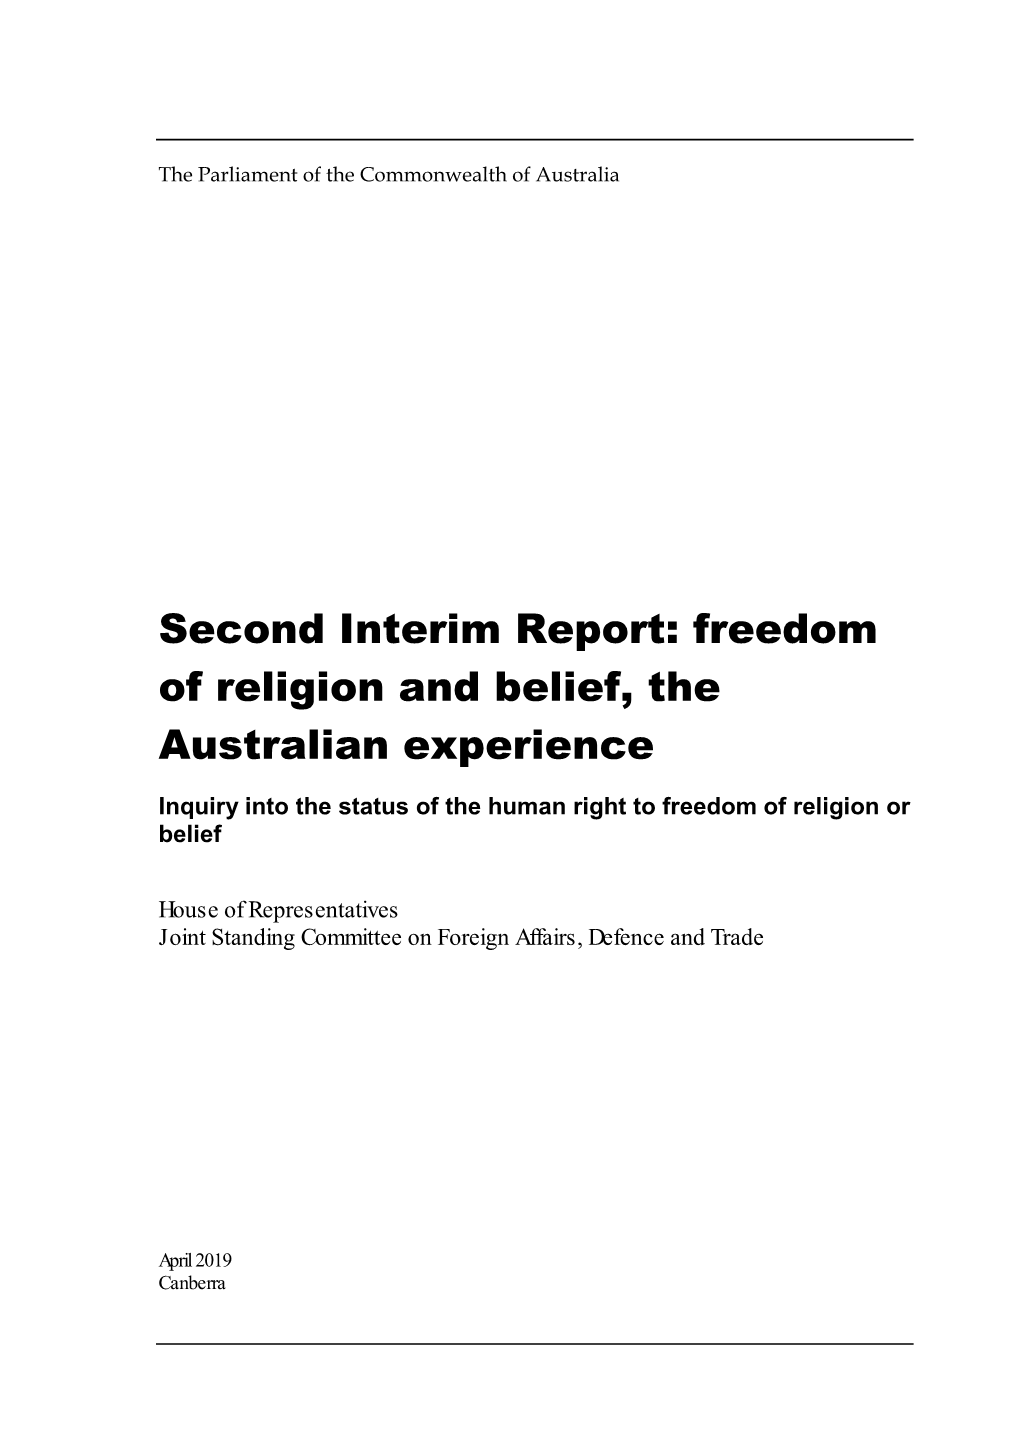 Freedom of Religion and Belief, the Australian Experience